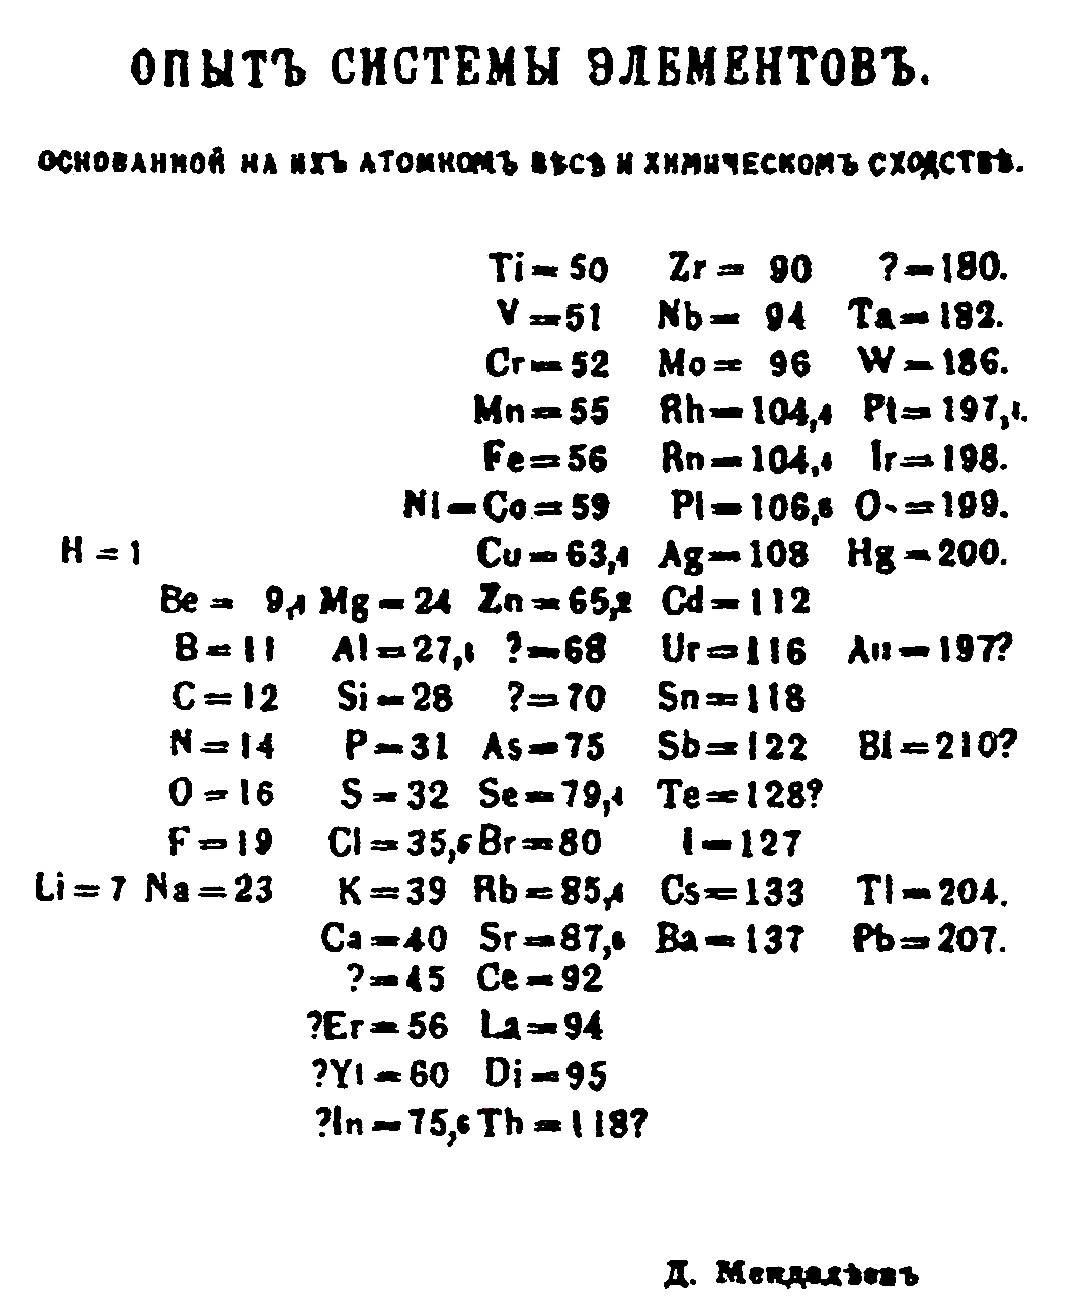 Mendeleevs_1869_periodic_table.png